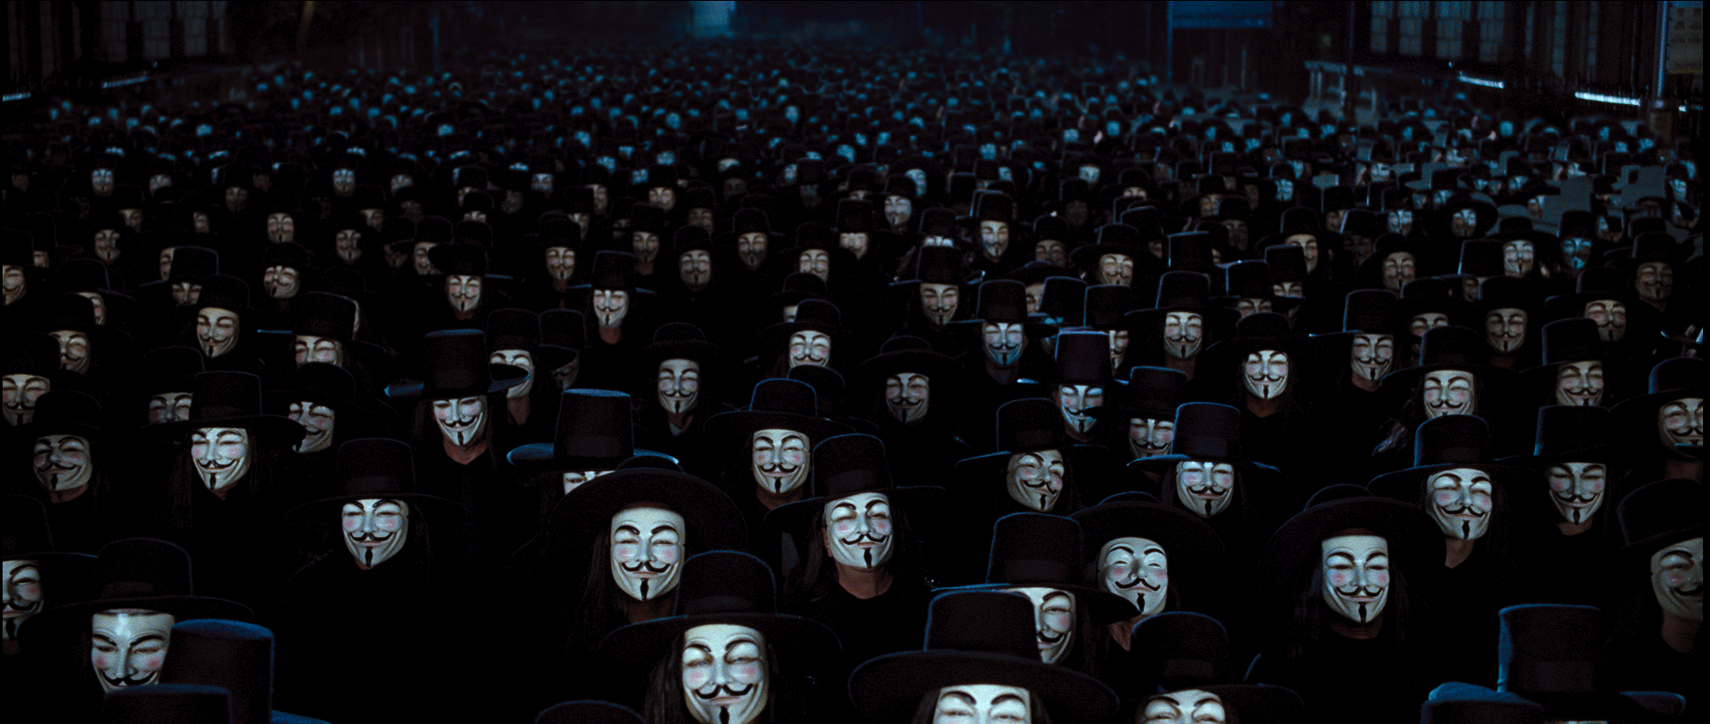 https://fsmedia.imgix.net/55/ac/05/60/3298/48a5/a667/950275fac747/v-for-vendetta-decade-wachowskis-dark-knight-anonymous.png